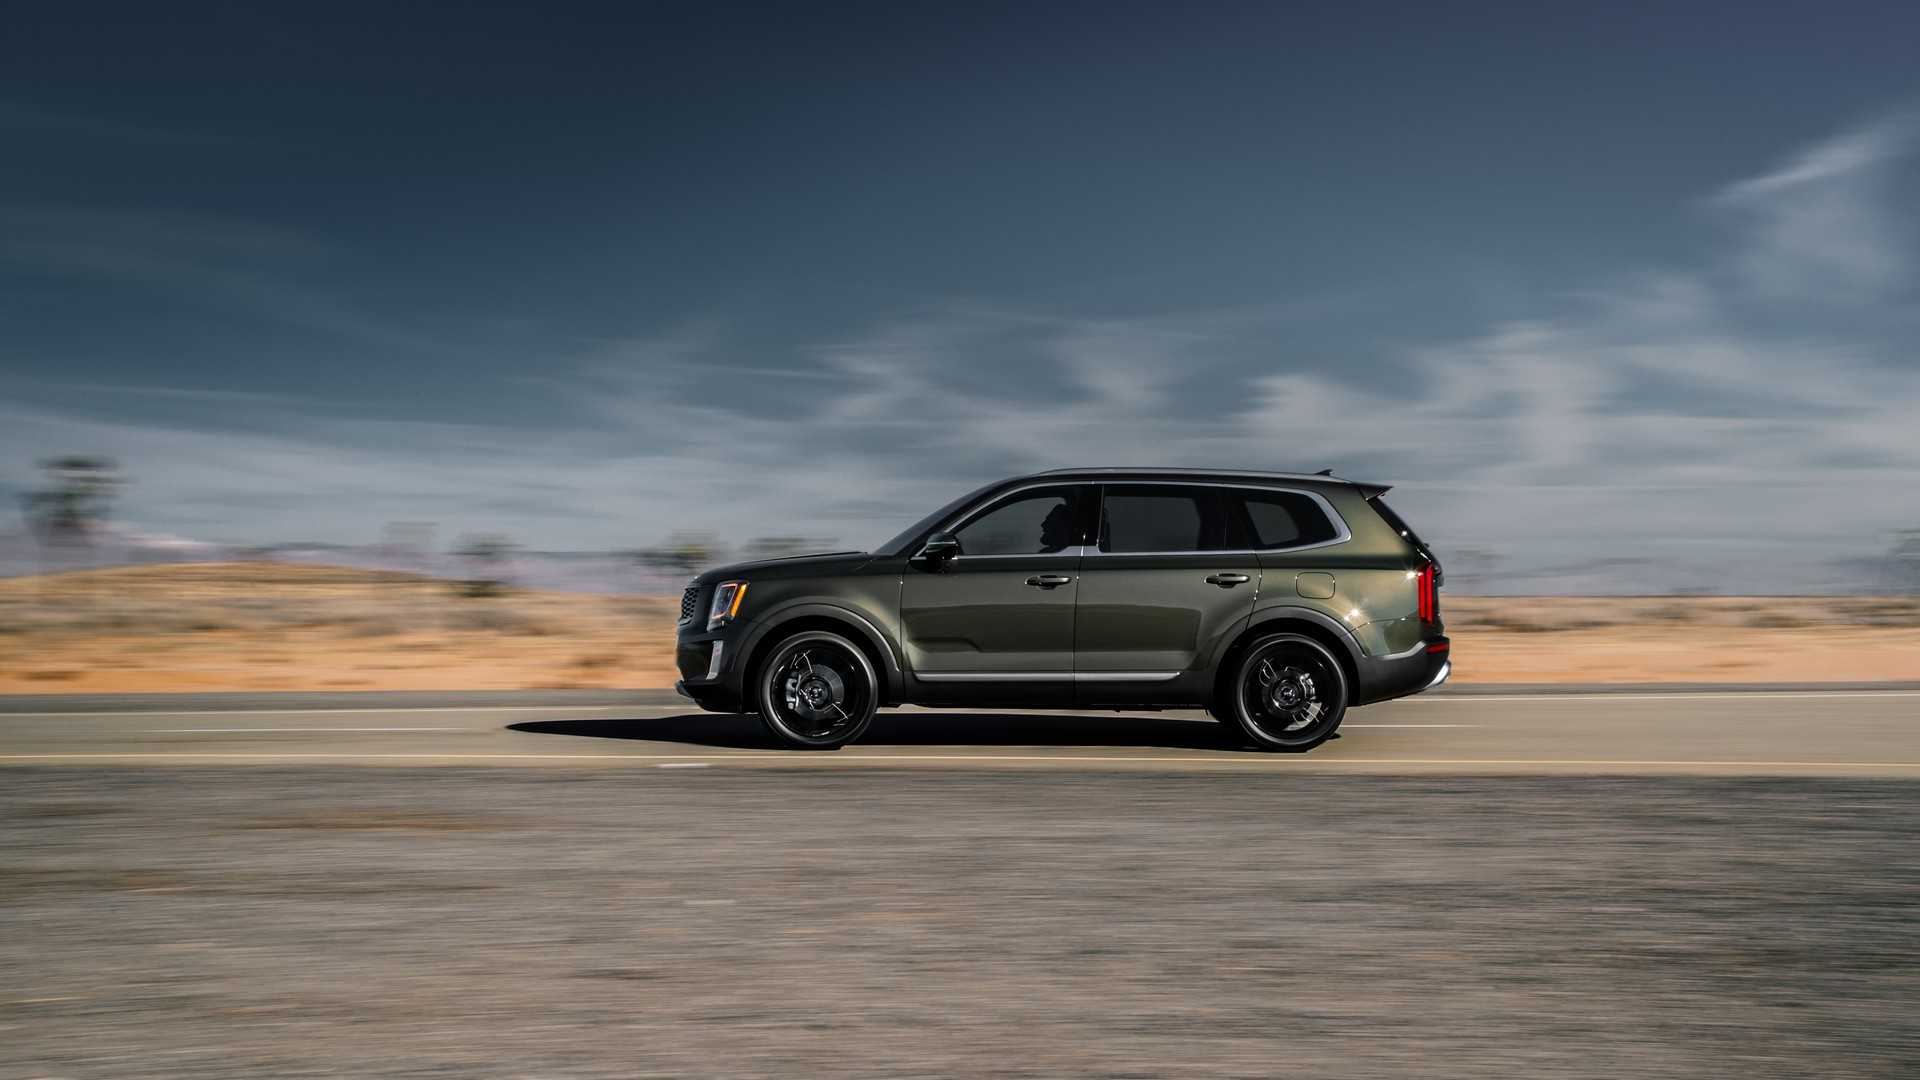 Kia Telluride Tested By IIHS, Gets Top Safety Pick Rating Without the